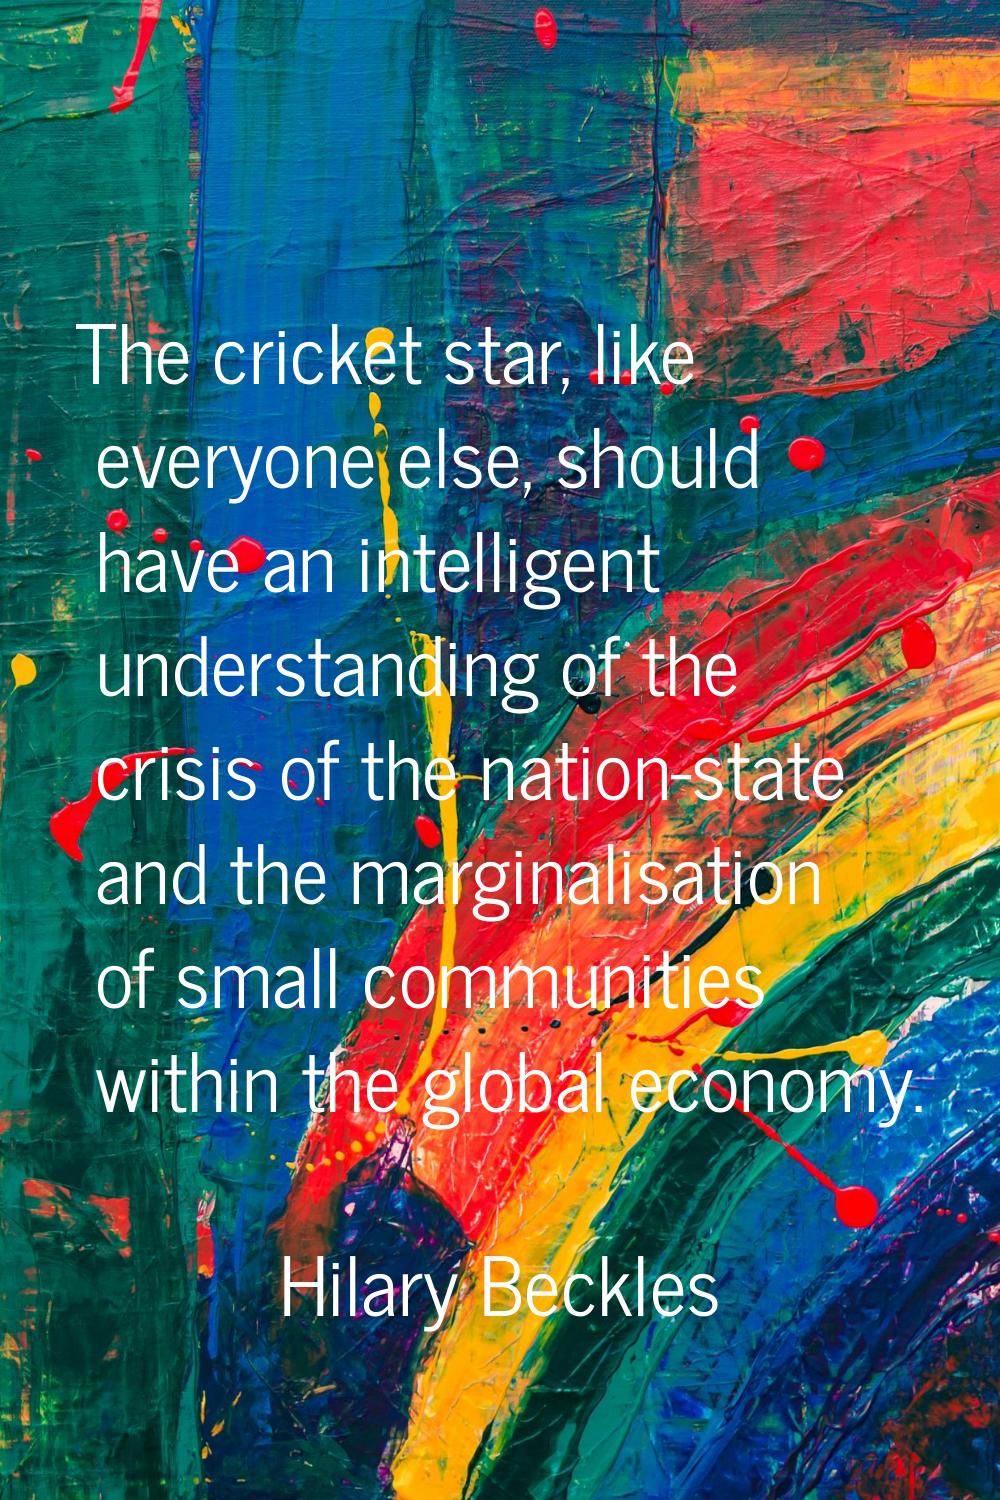 The cricket star, like everyone else, should have an intelligent understanding of the crisis of the